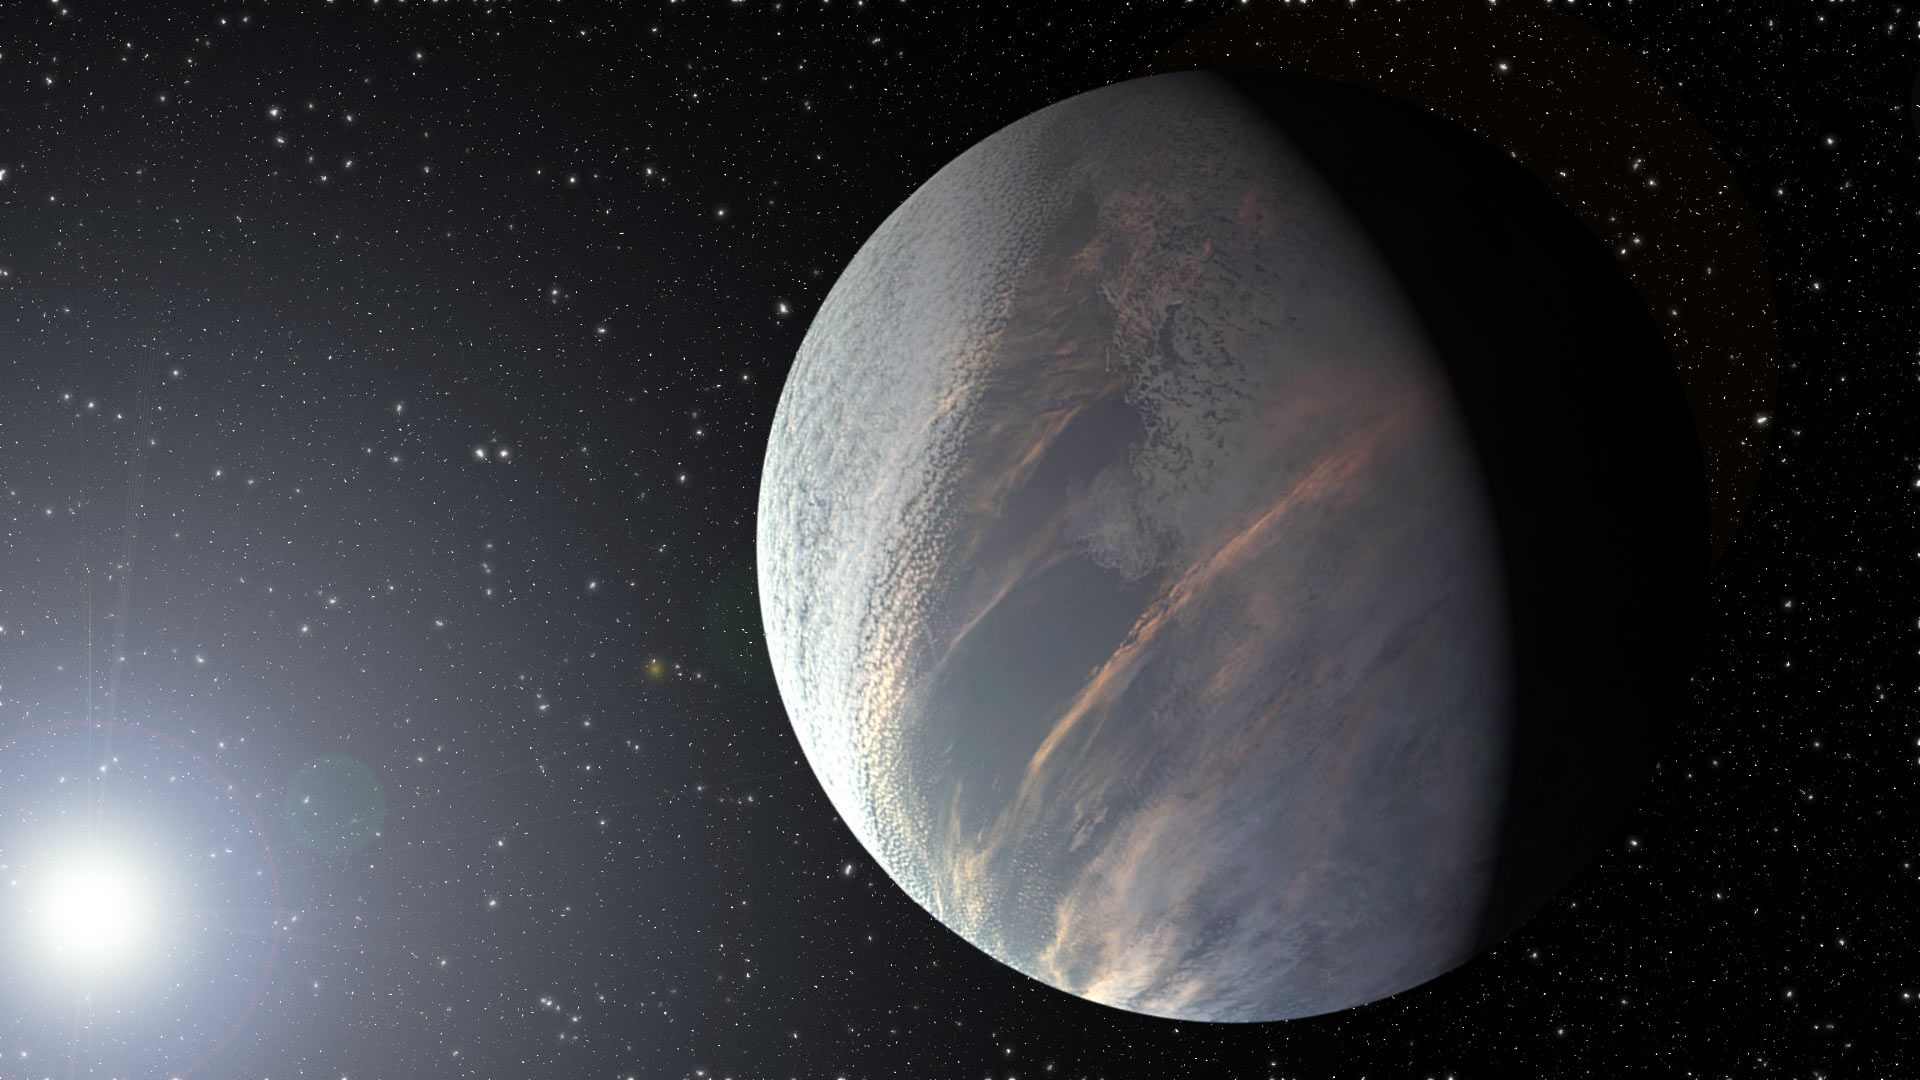 Planets Don't Need Plate Tectonics to Be Habitable. Astrobiology